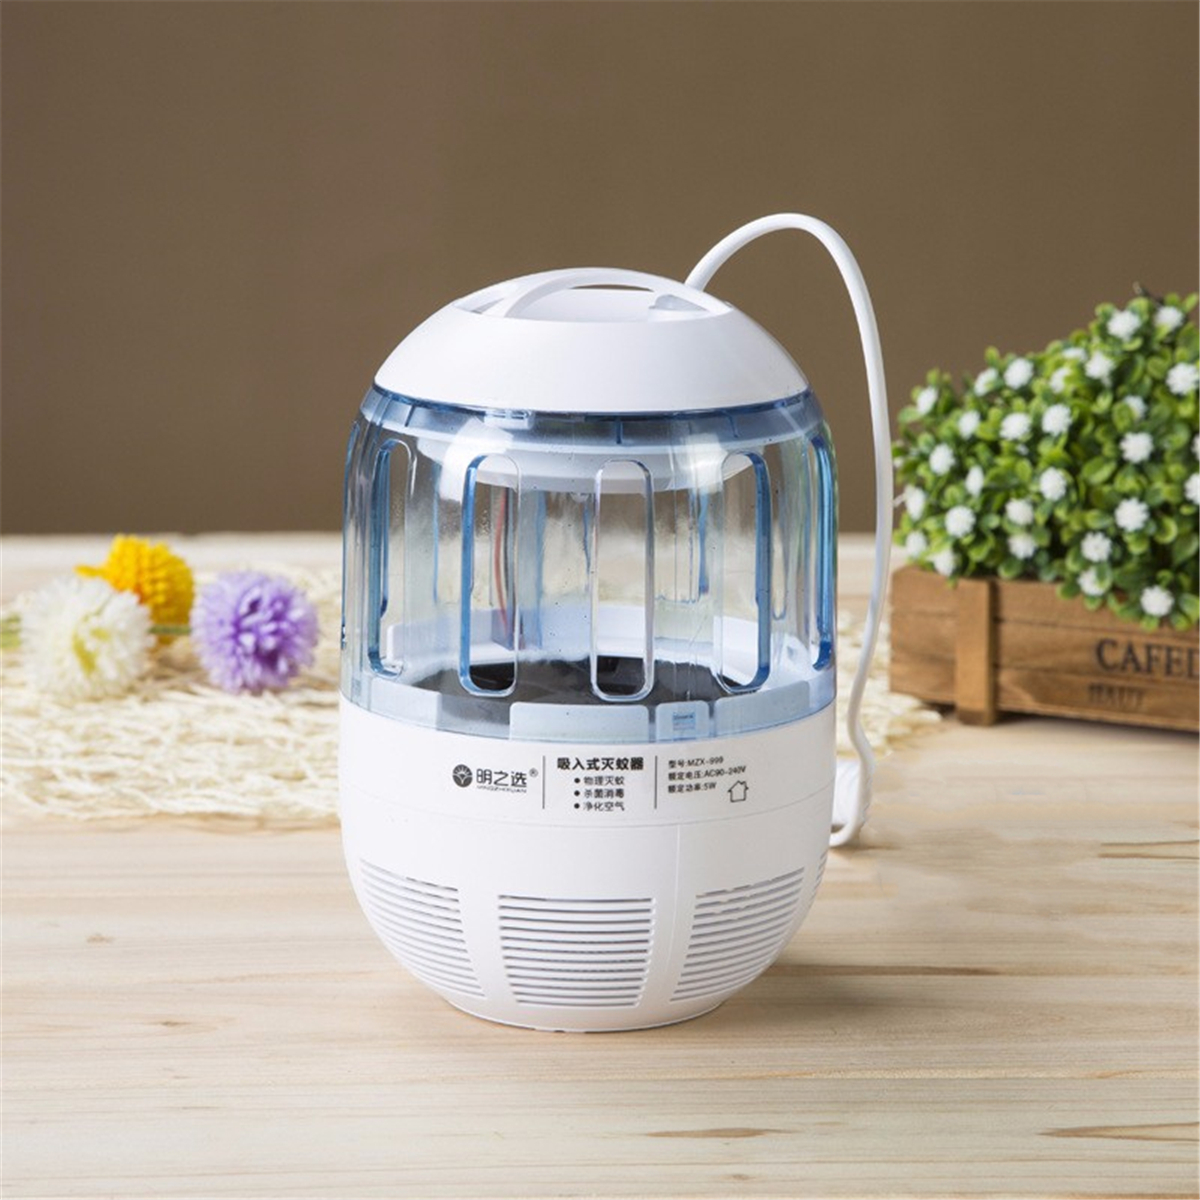 USB-Mosquito-Dispeller-LED-Mosquito-Trap-Fly-Insect-Killer-UV-Light-Lamp-Mosquito-Killer-with-360-De-1484265-8